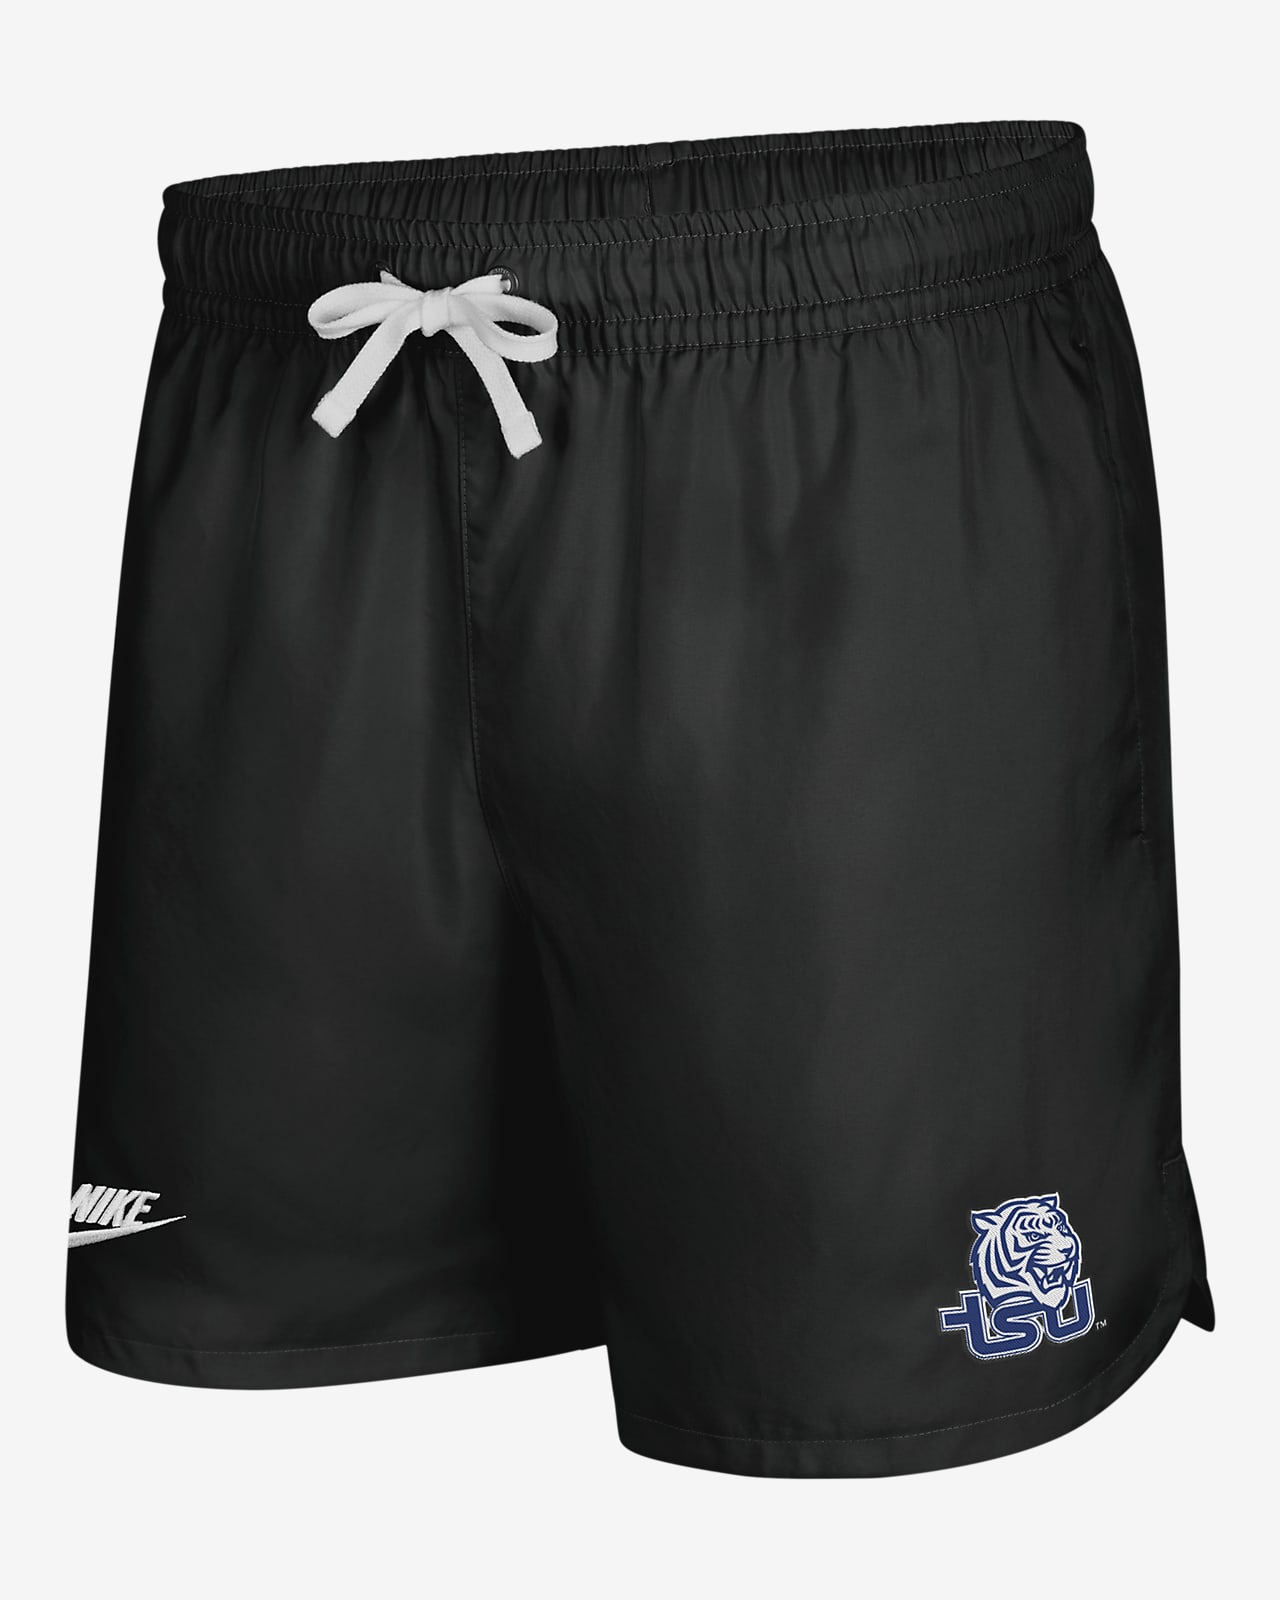 Shorts universitarios Nike Flow para hombre Tennessee State